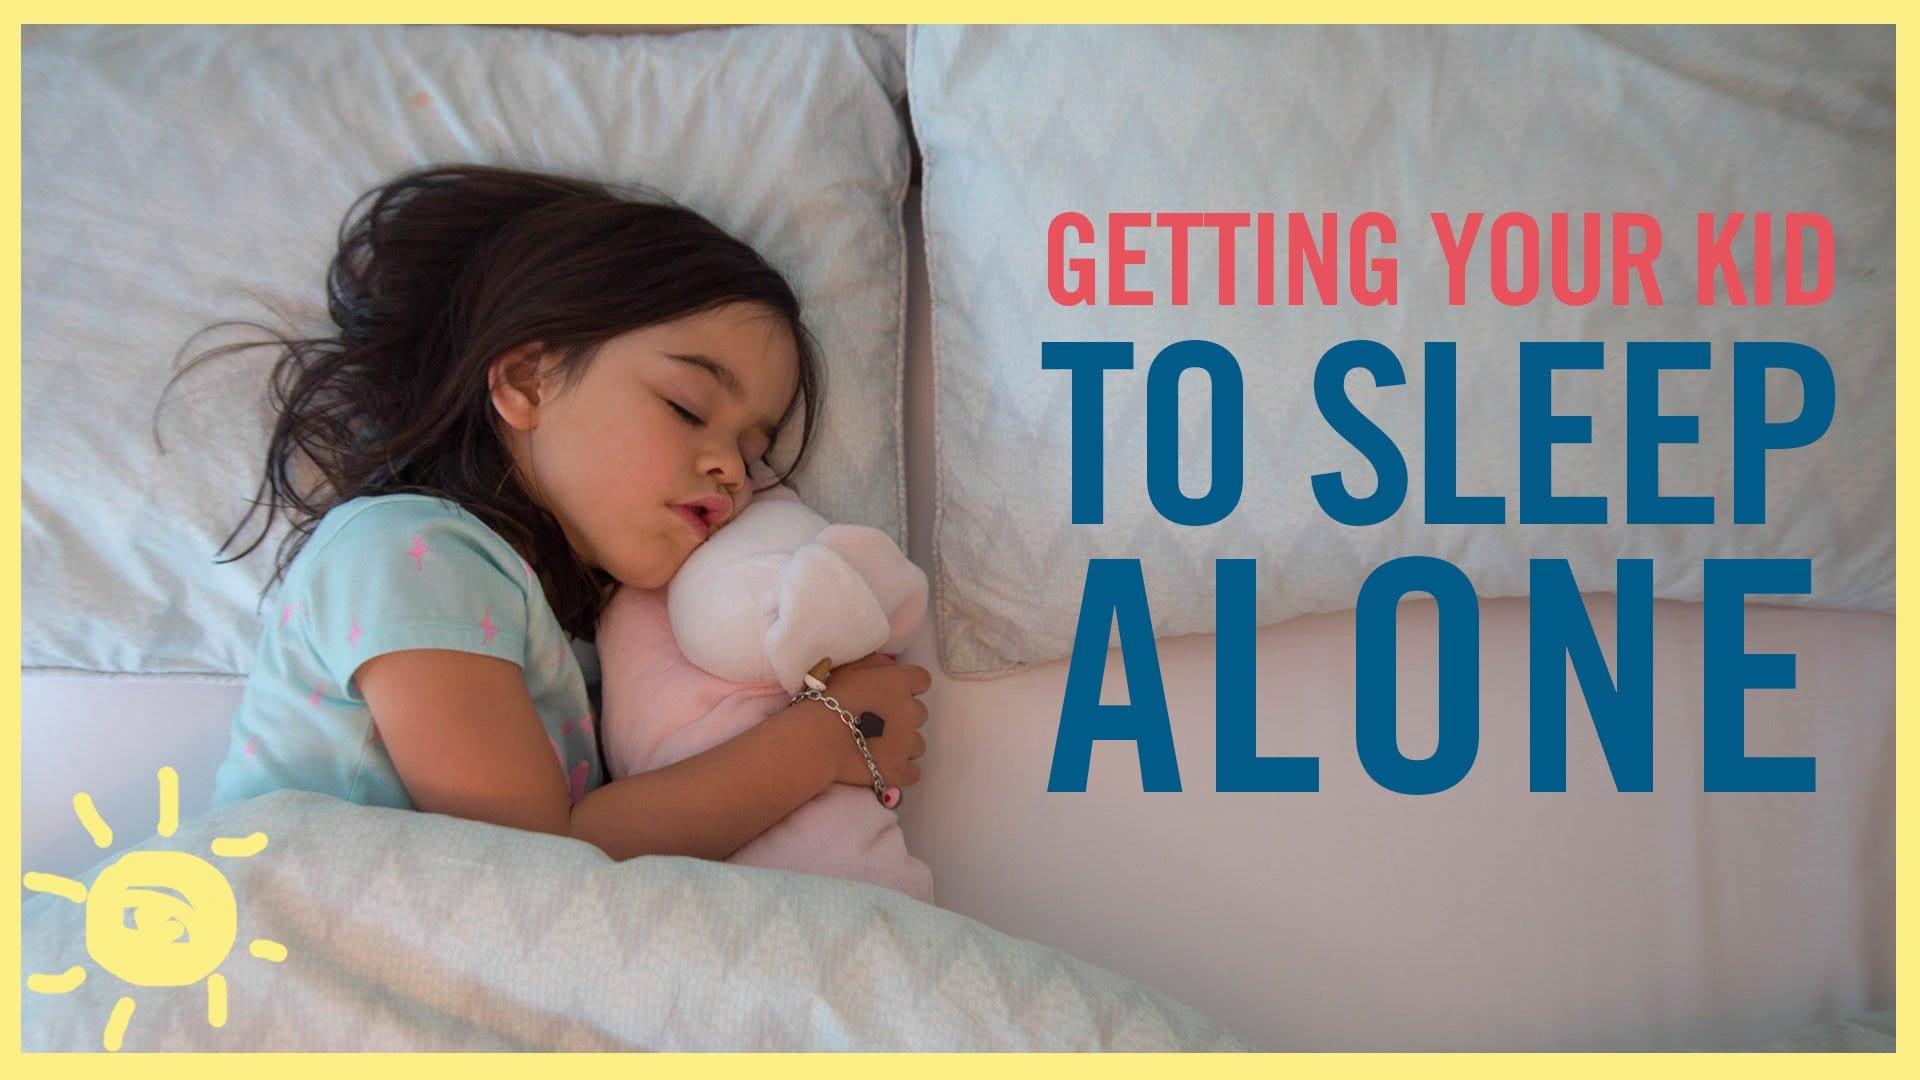 TIPS GETTING YOUR KID TO SLEEP ALONE! Smag31